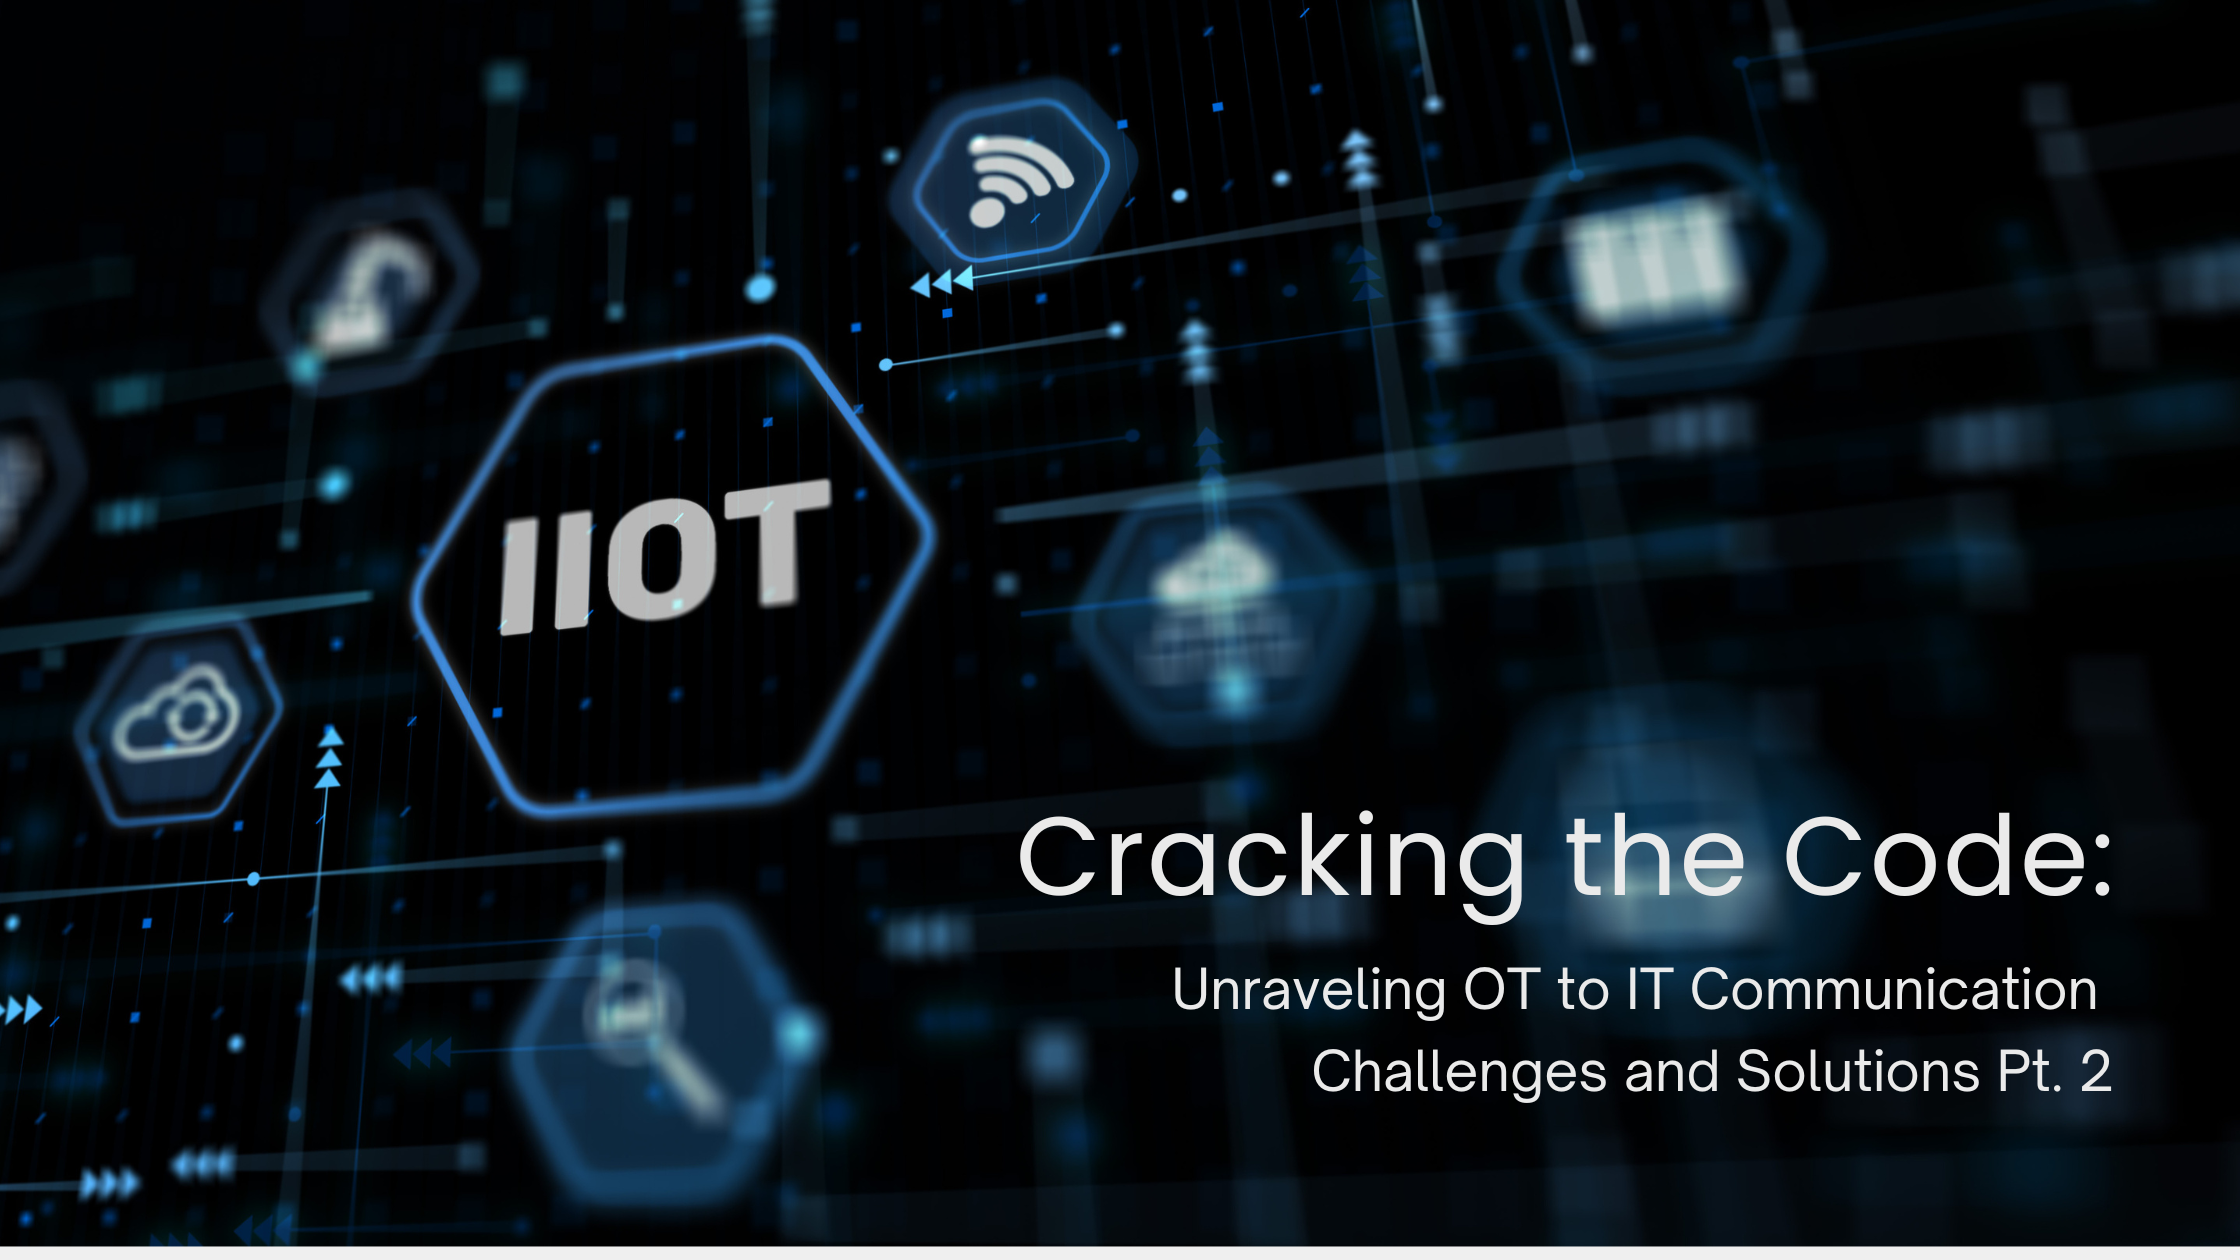 Cracking the Code: Unraveling OT to IT Communication Challenges and Solutions Pt. 2